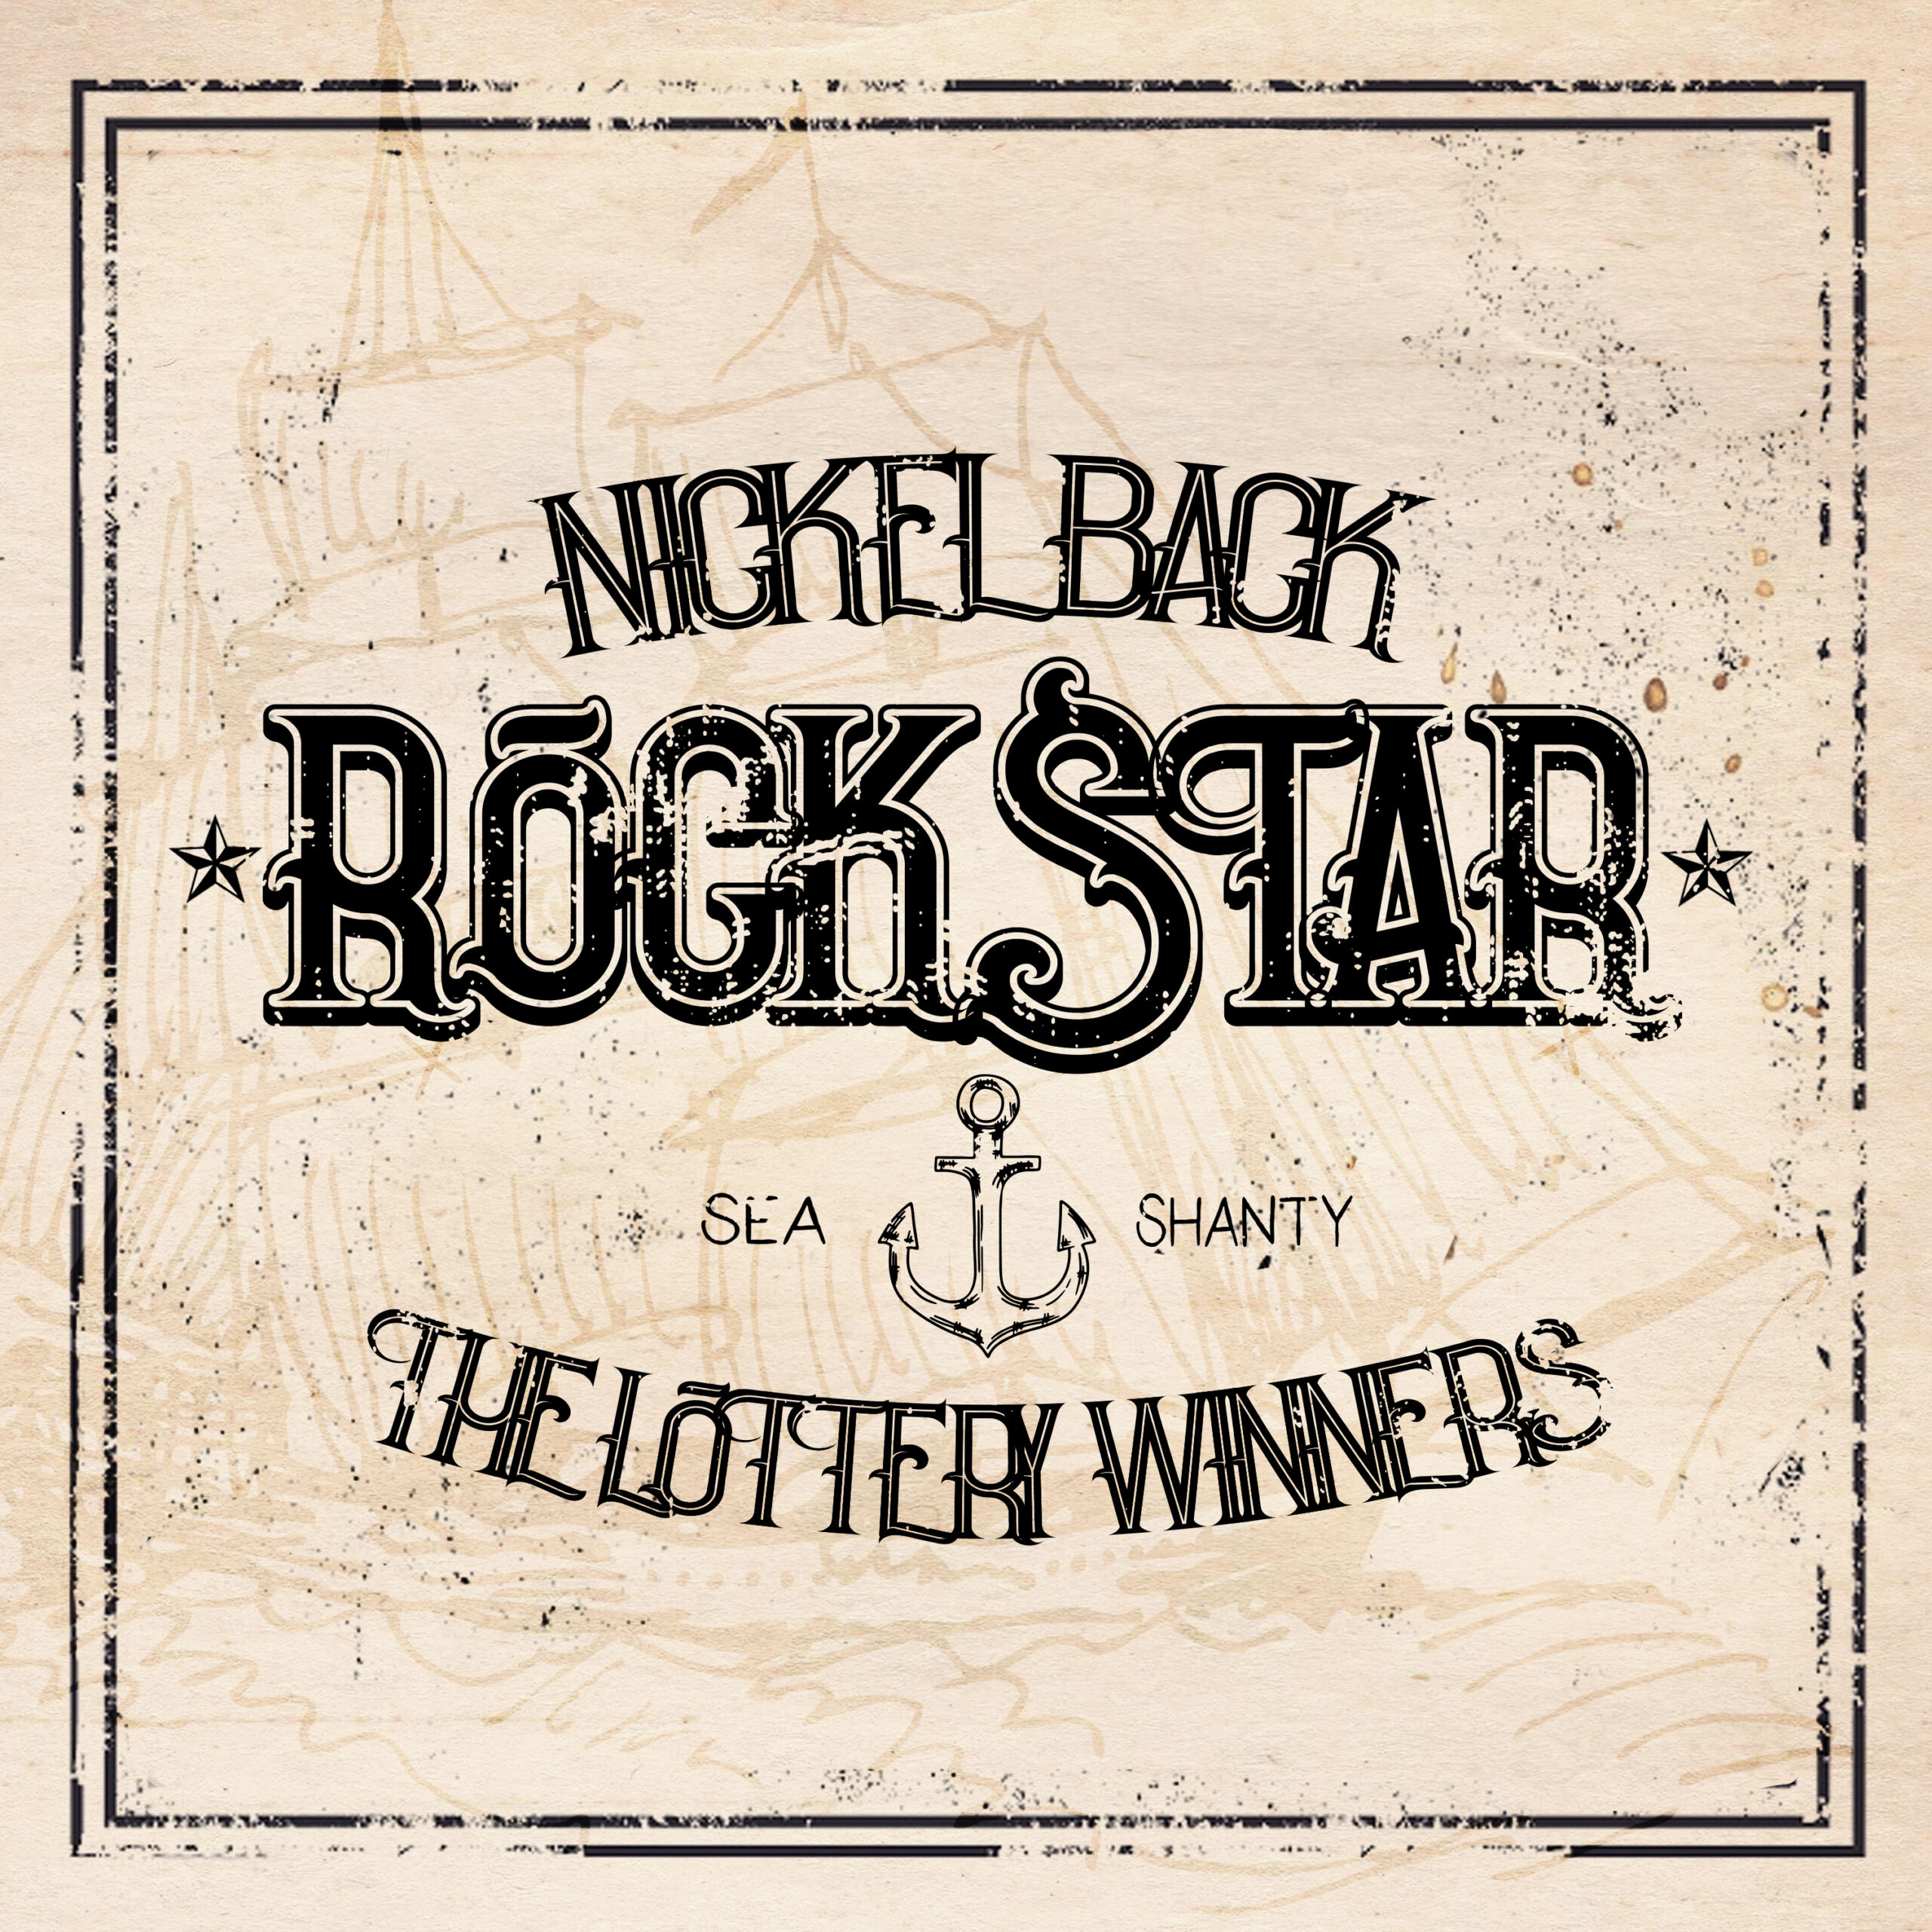 Video of the Day: Nickelback’s ‘Rockstar’ as a Sea Shanty (and it’s Not a Cover, It’s Actually Nickelback)